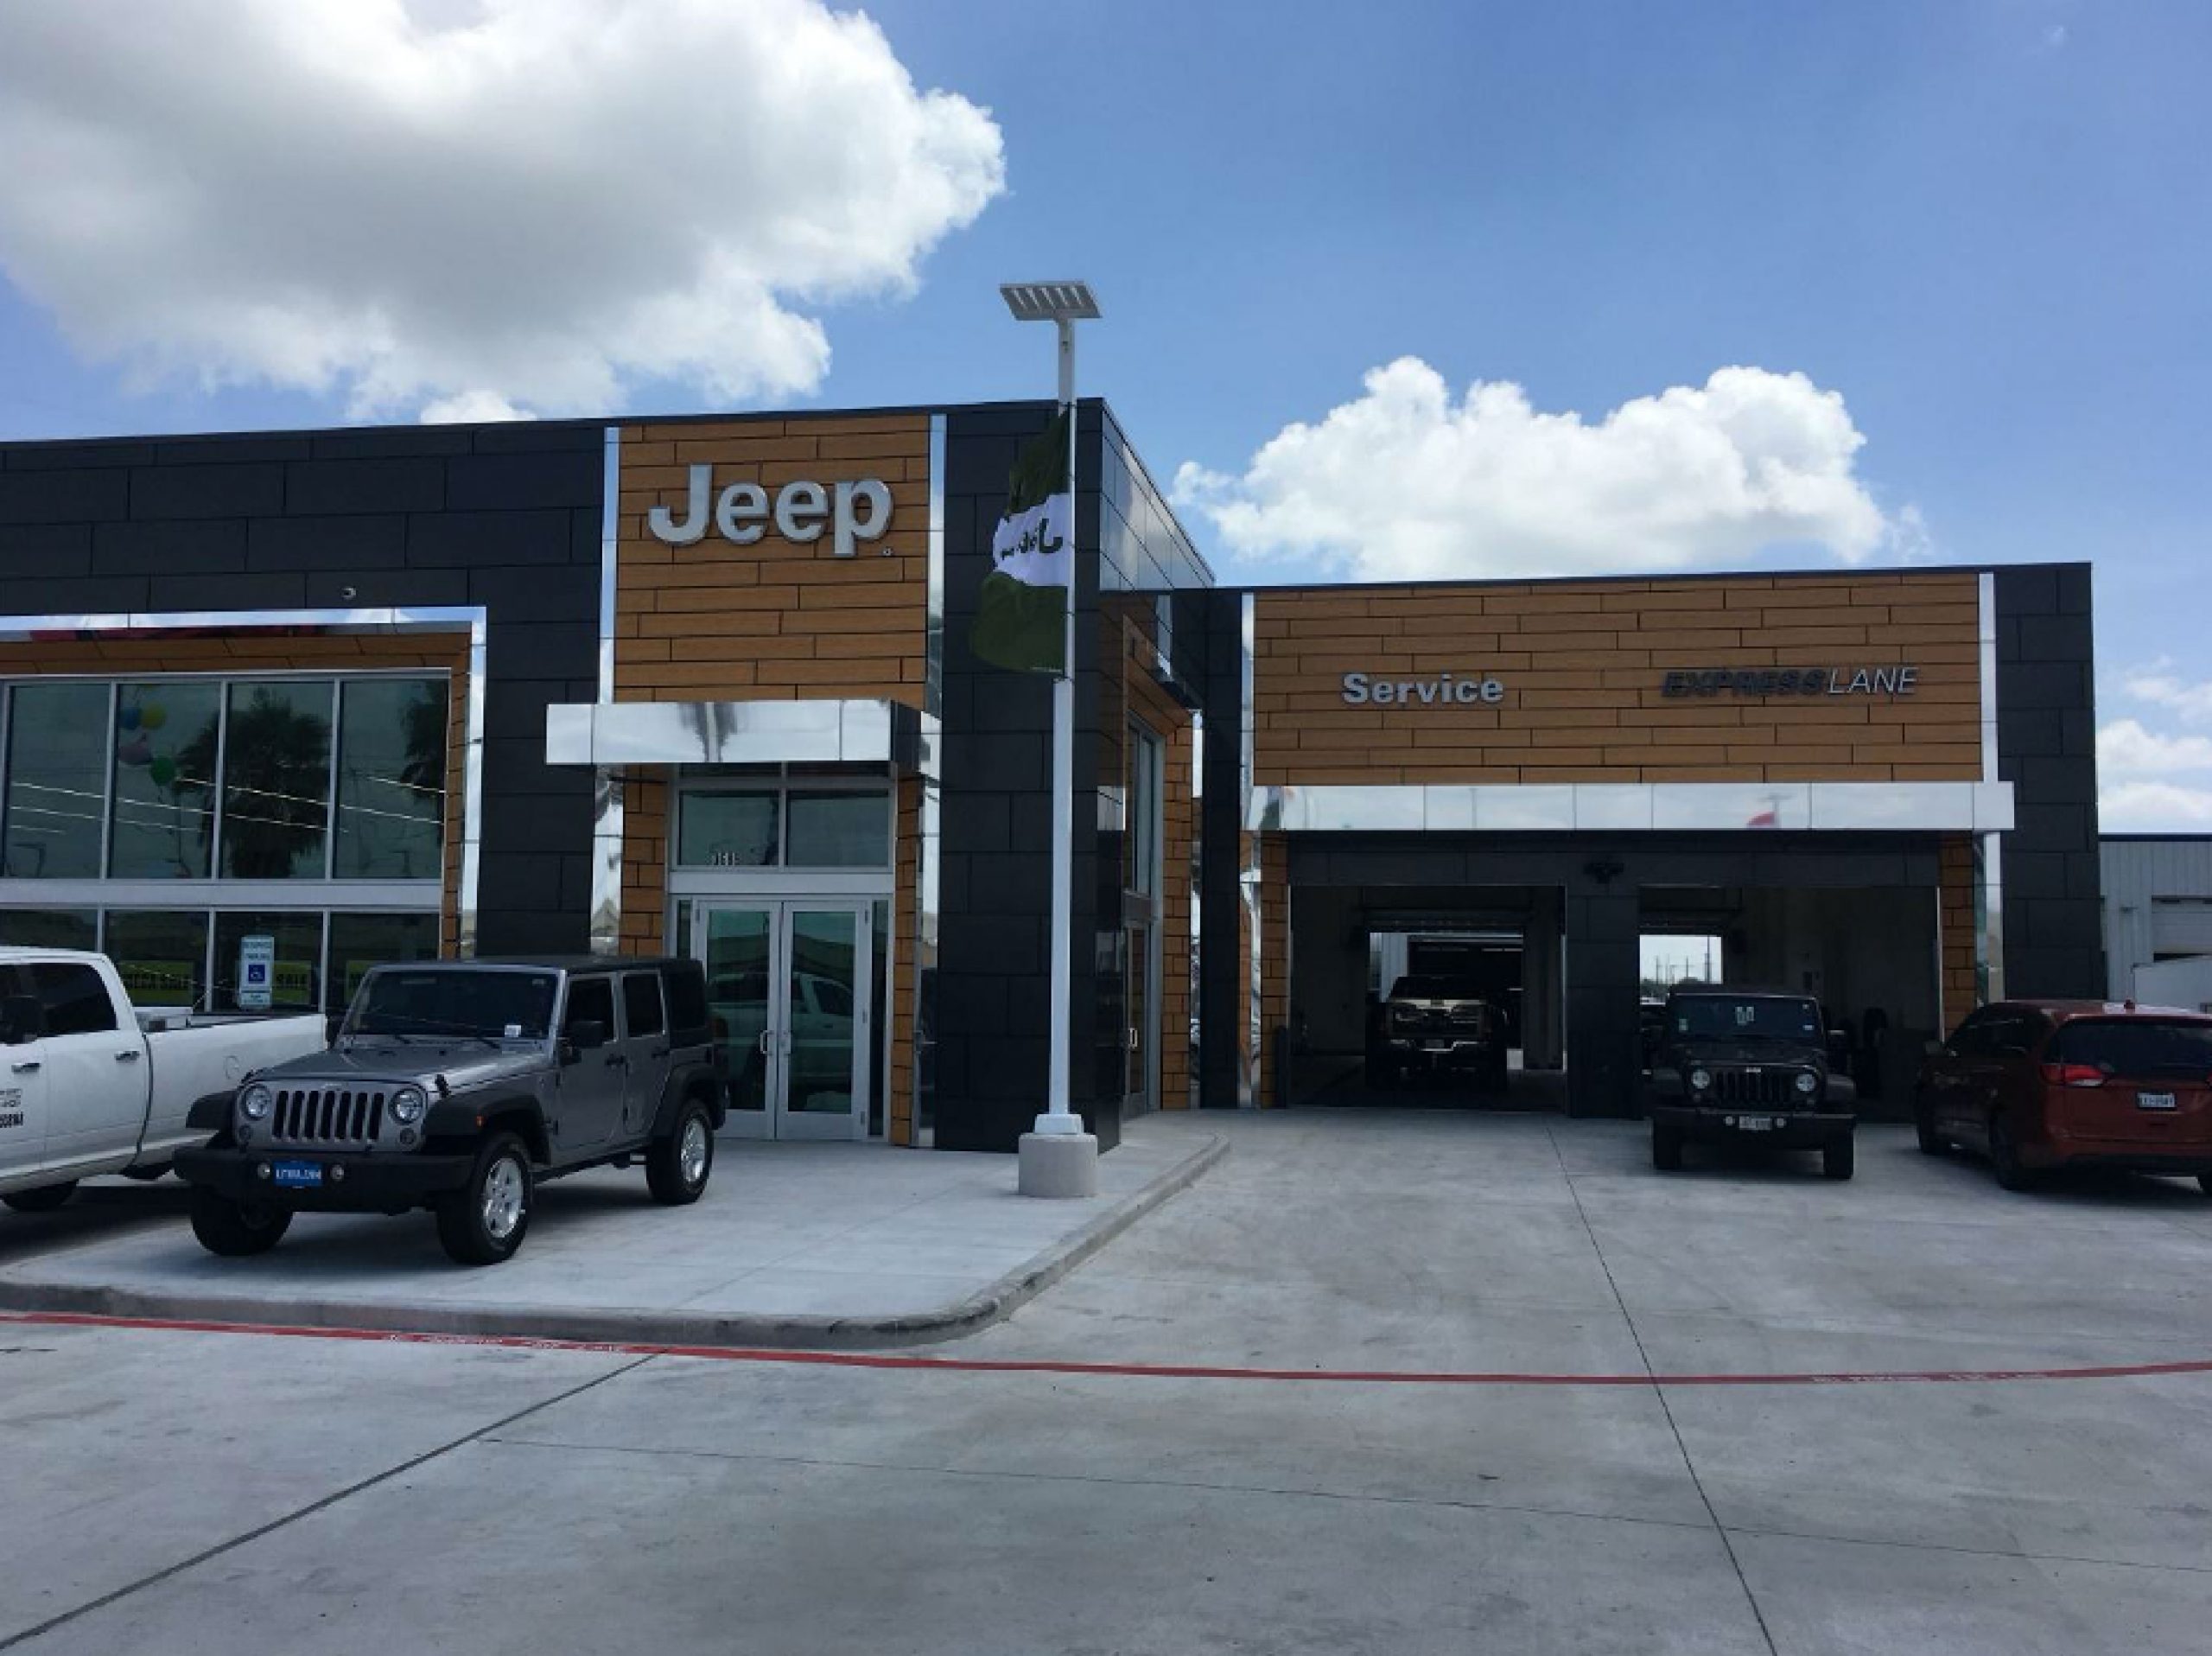 parked jeeps in front of jeep service shop